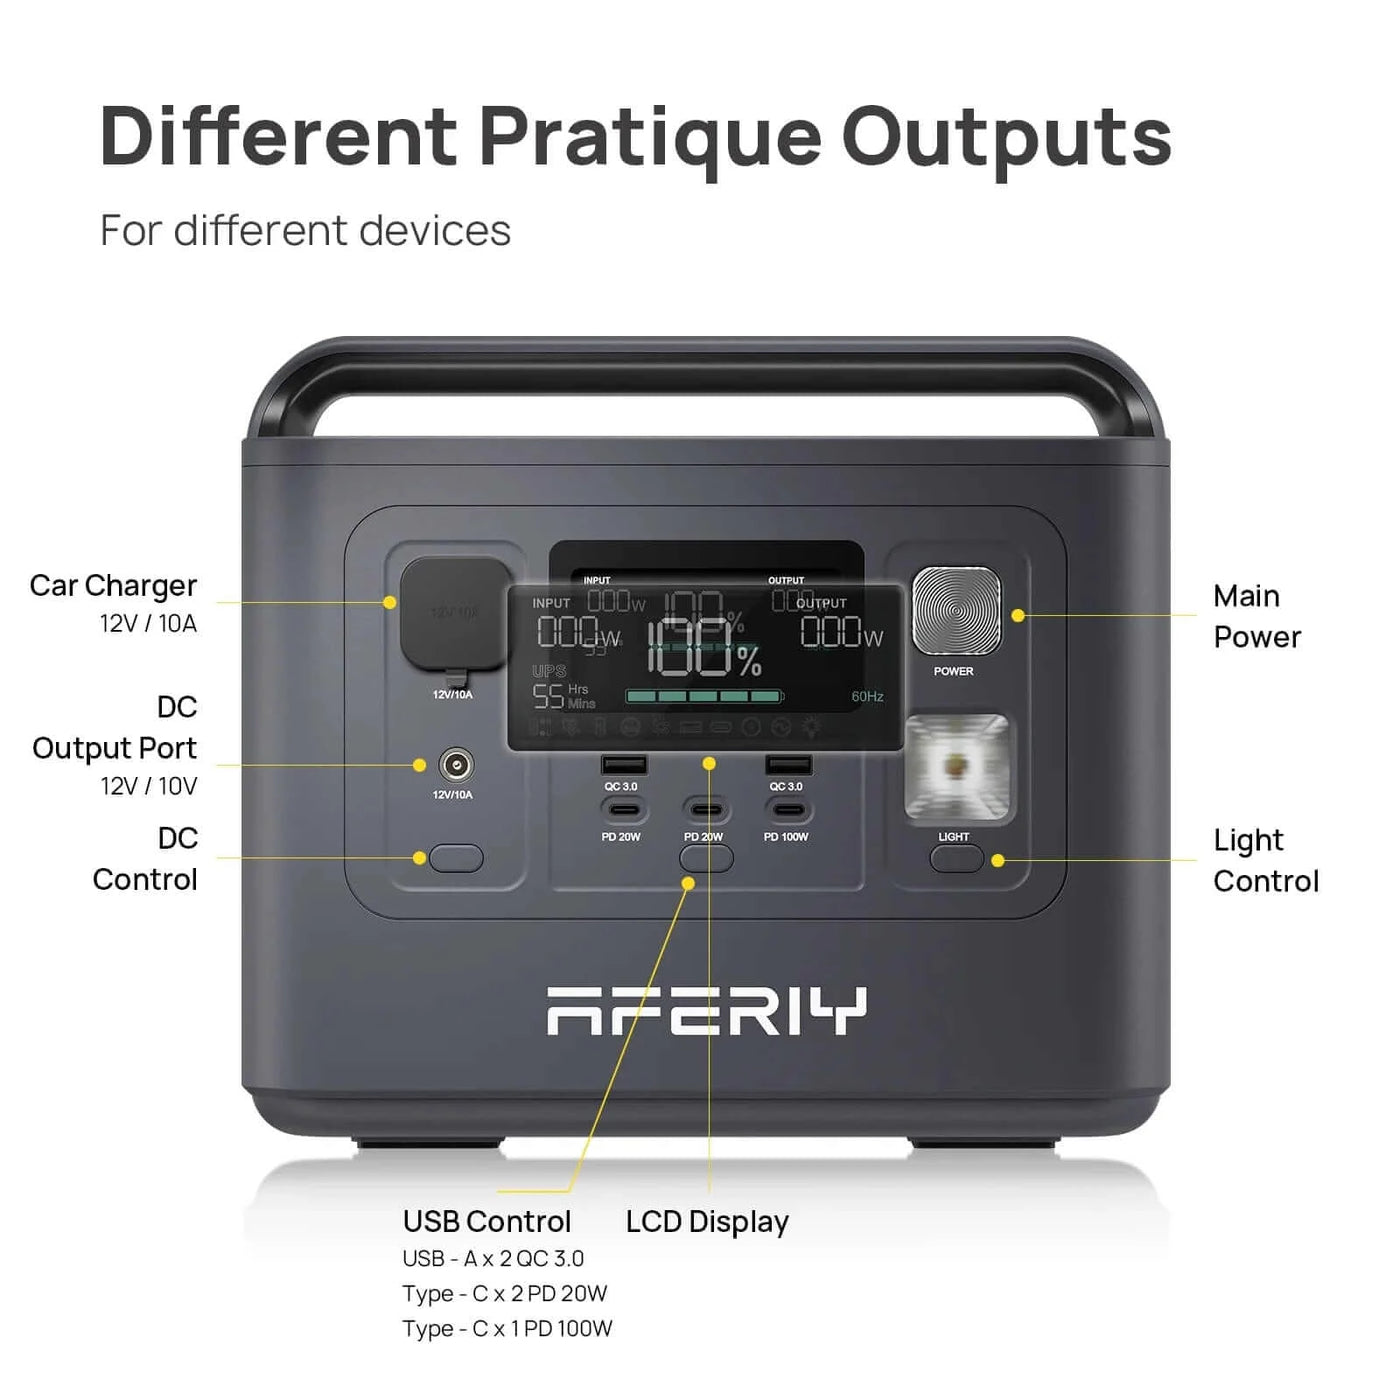 800 Watt Portable Power Station - 512Wh: AFERIY P010 - Output, Input, and Button Specifics